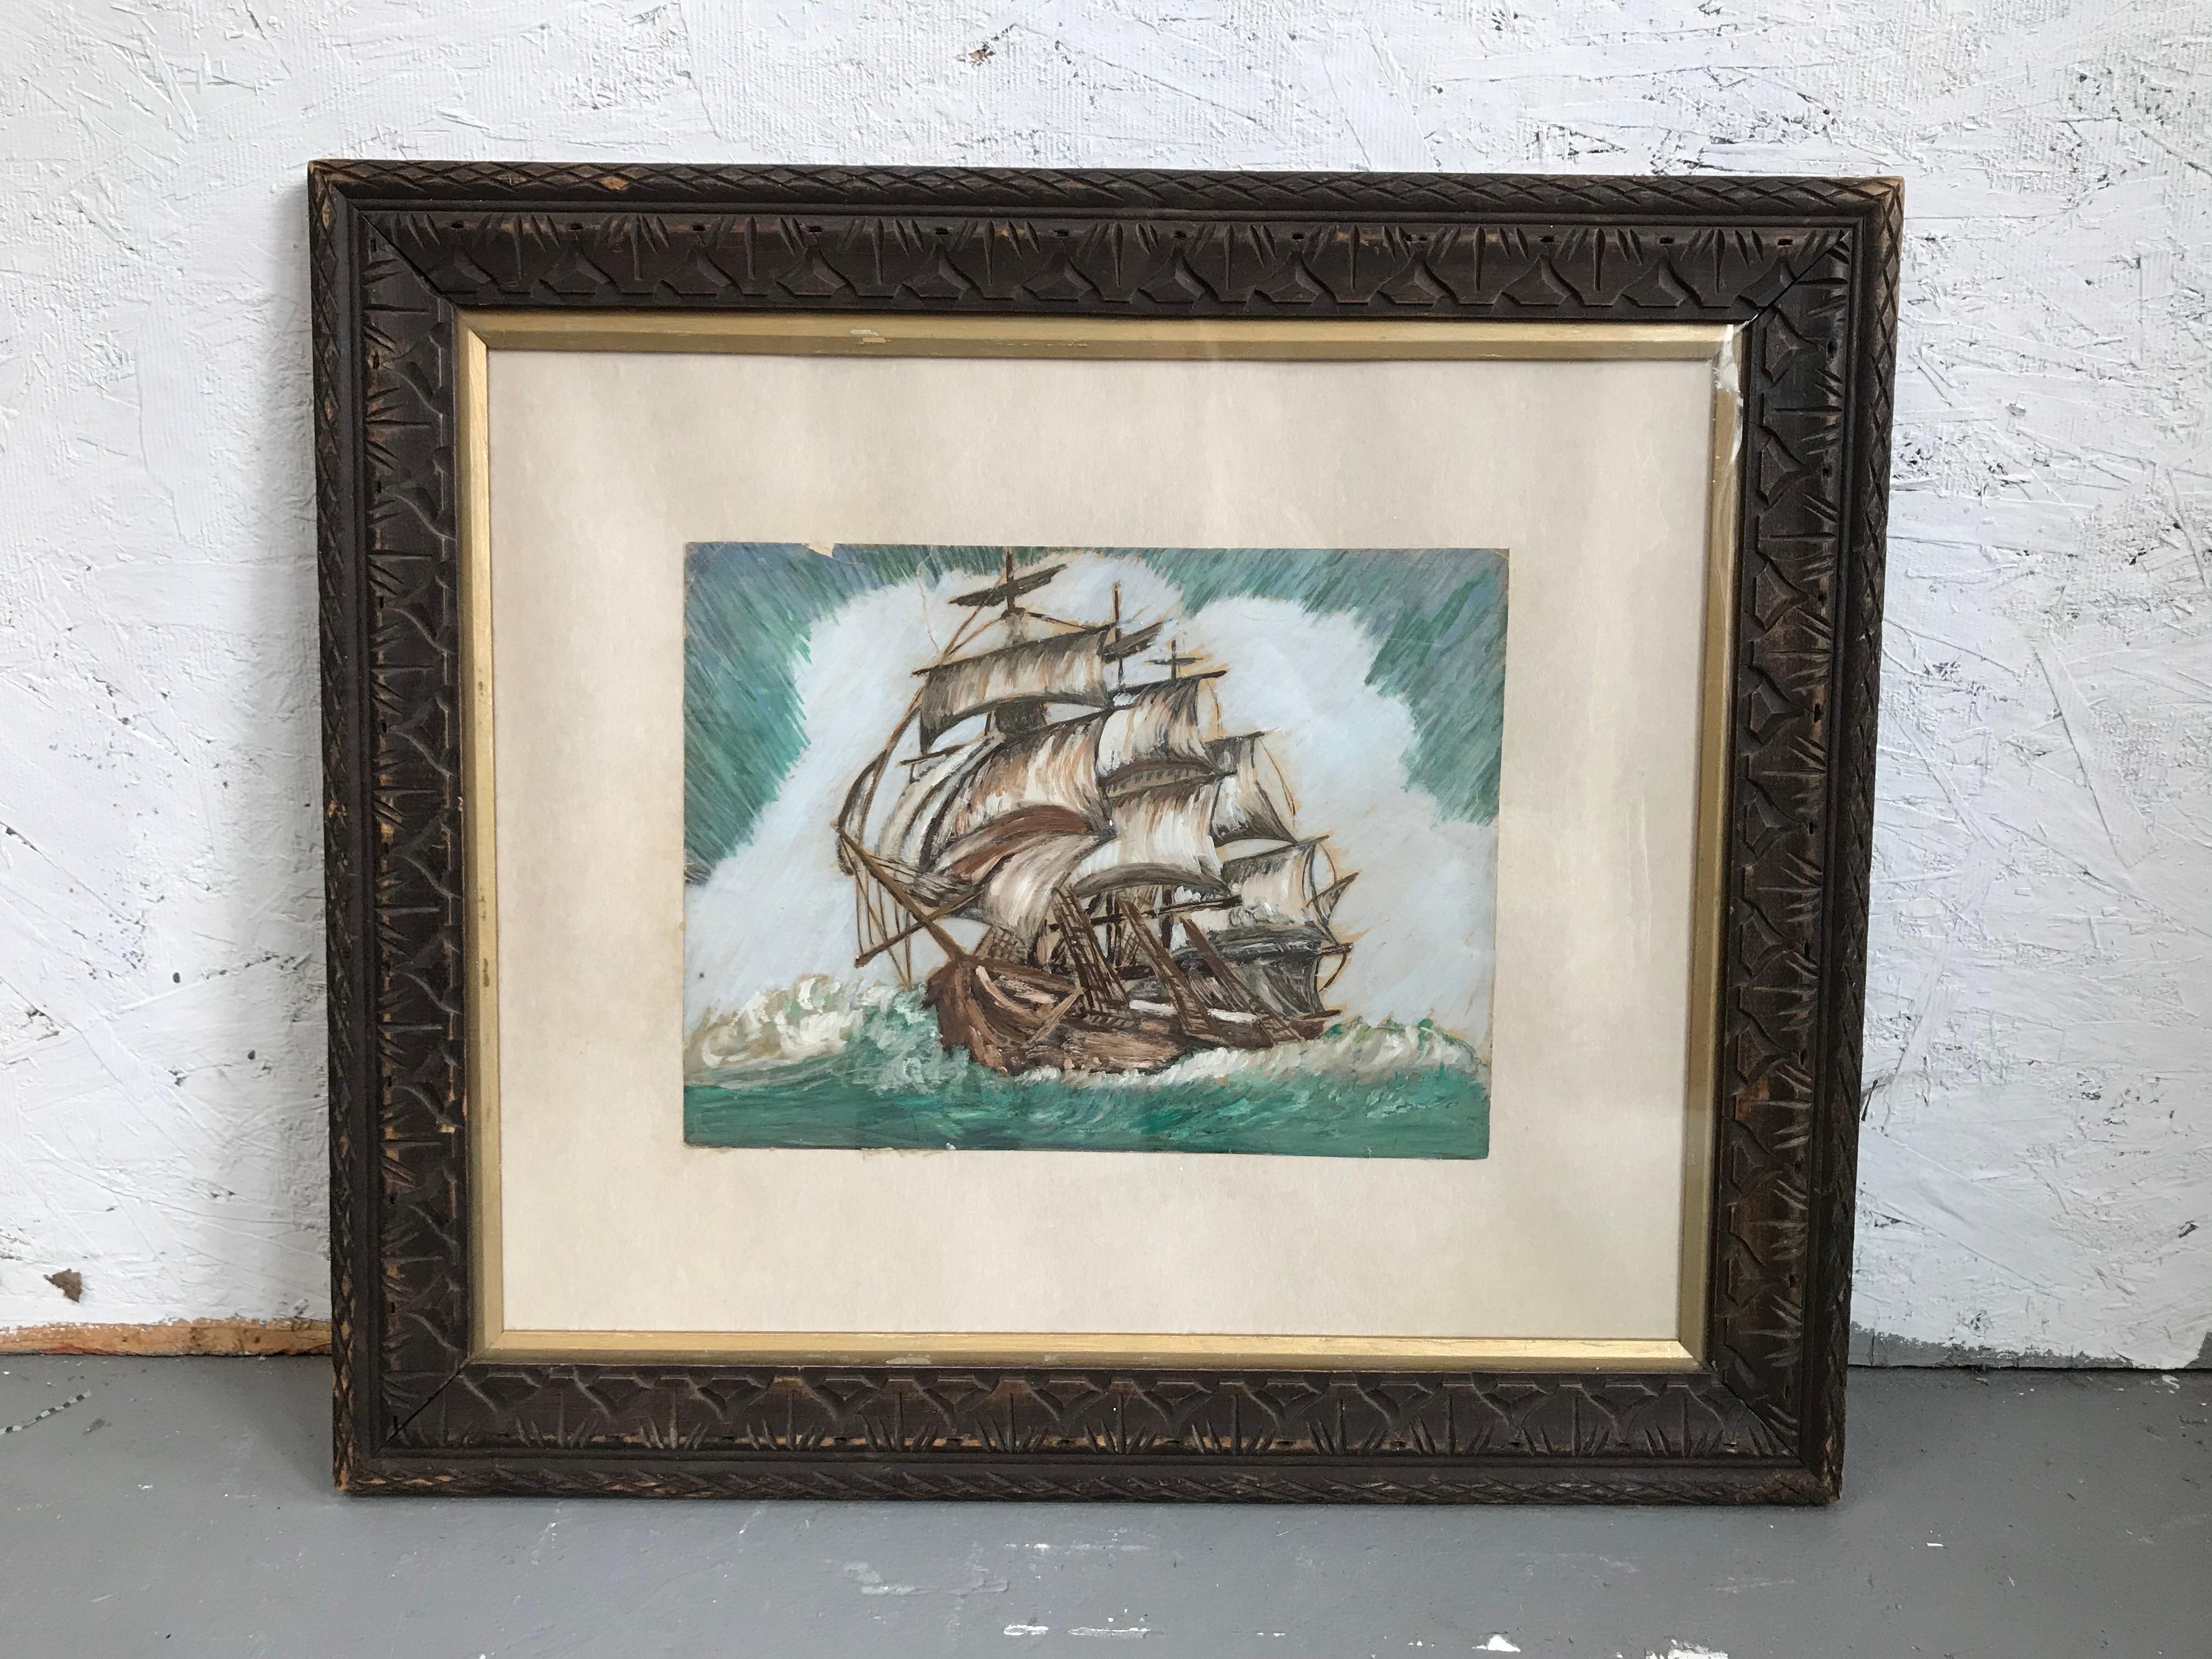 Unknown Landscape Art - 3 masted schooner ship on the water